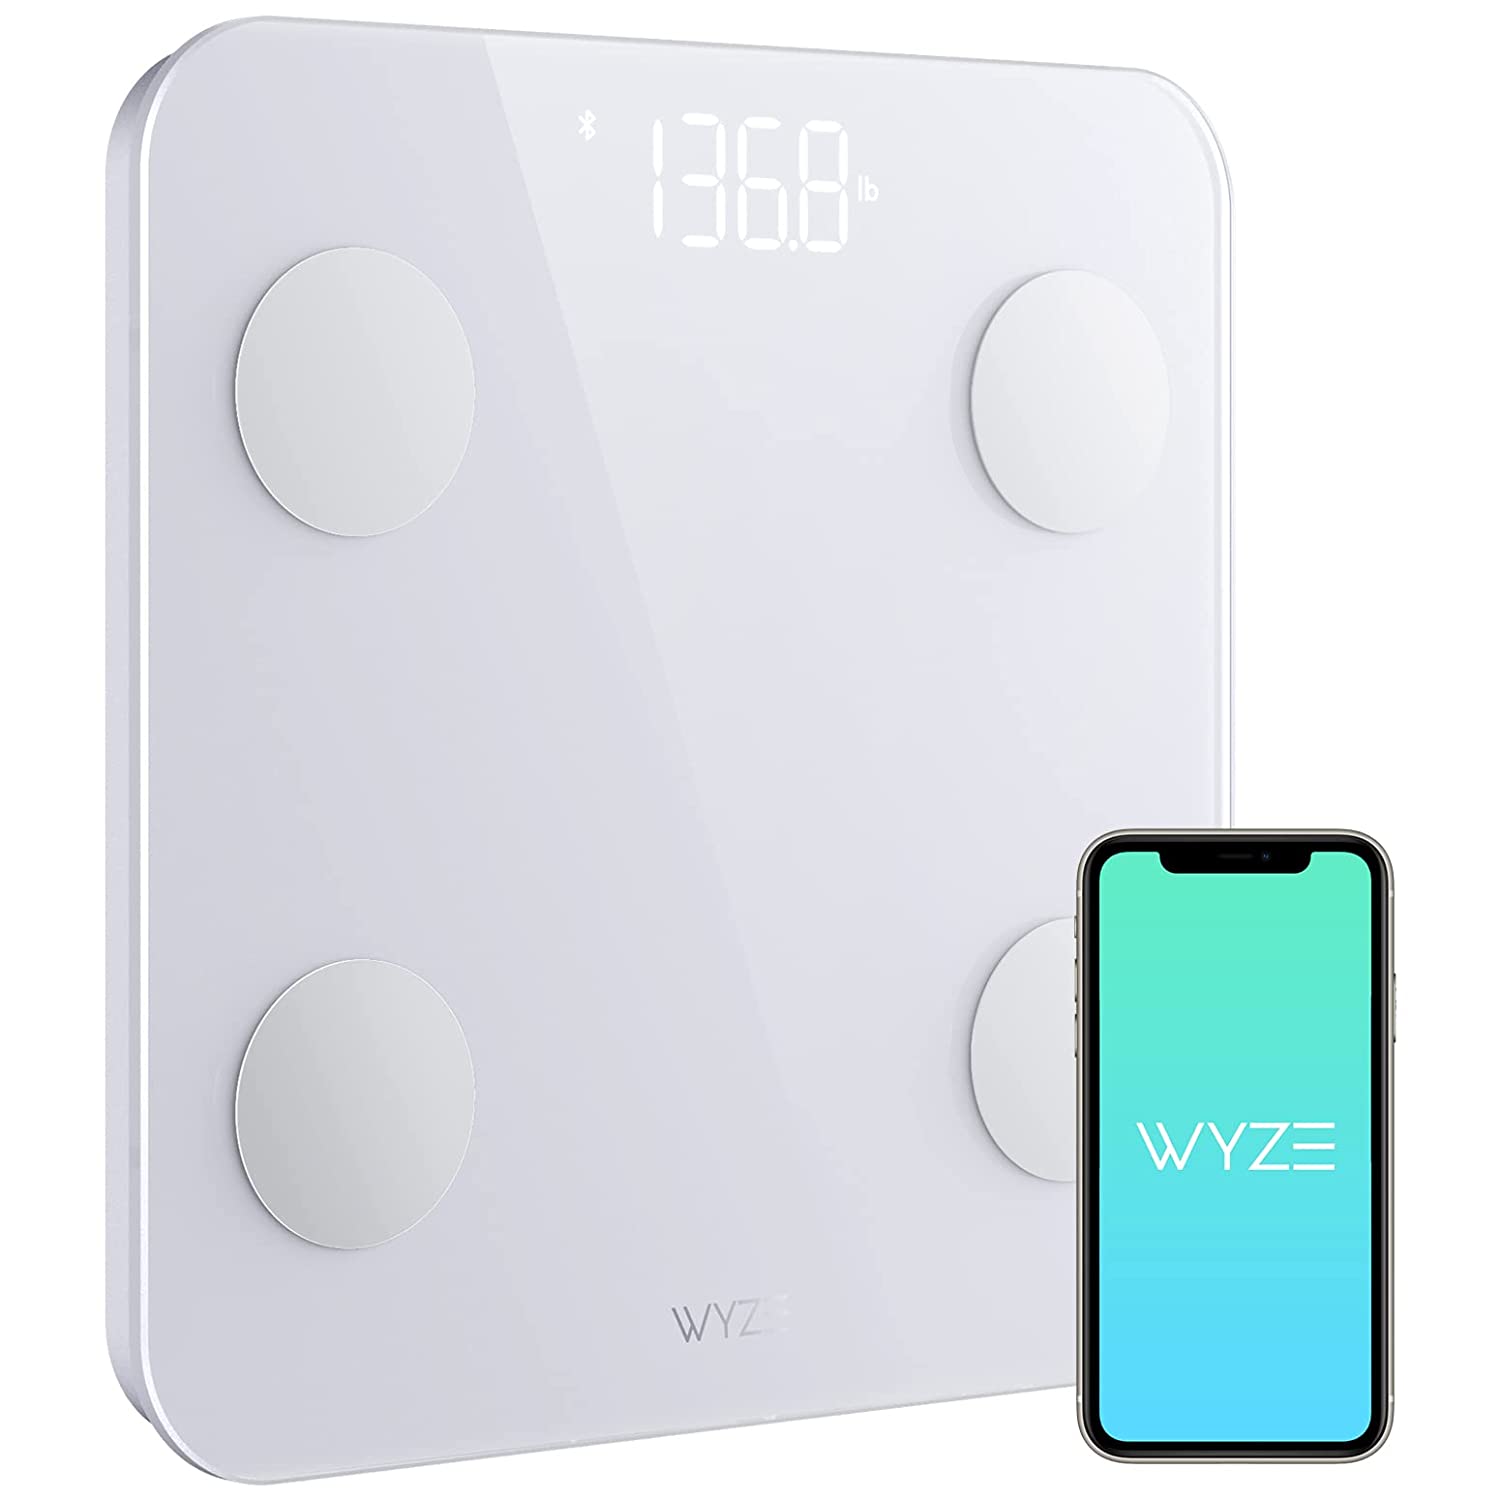 Introducing: Wyze Scale S 